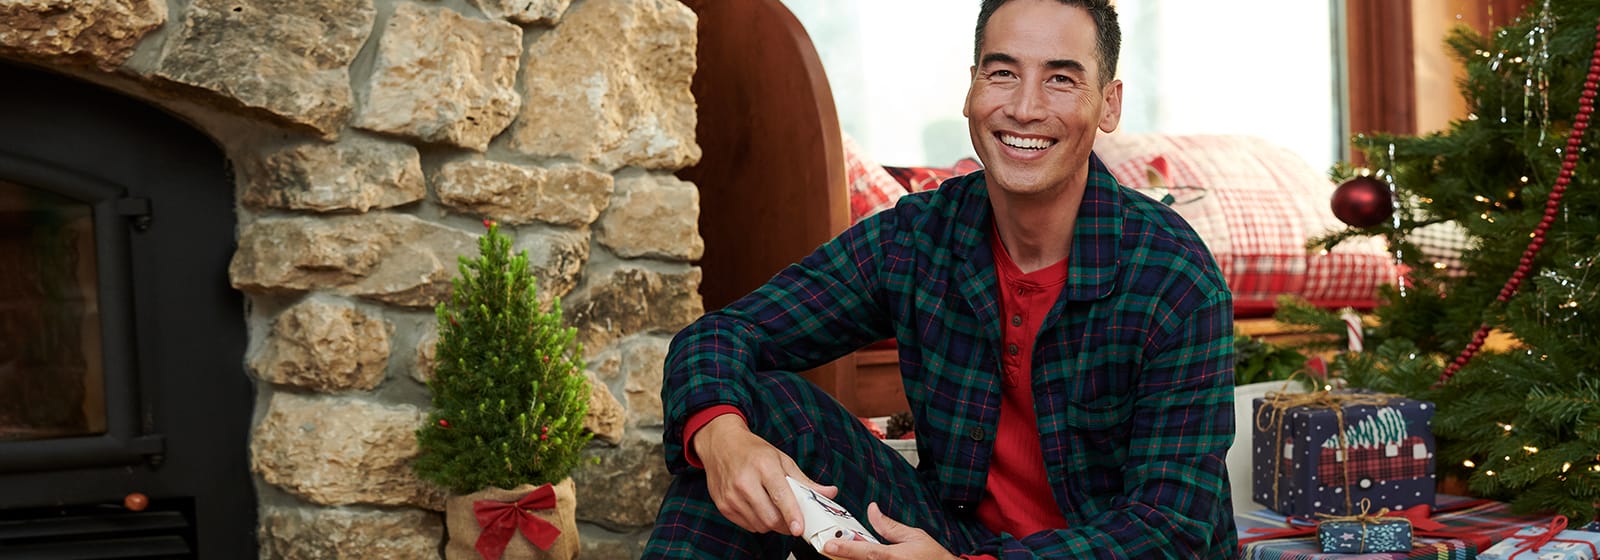 Get a Good Night's Sleep with the Most Comfortable Men's Pajamas